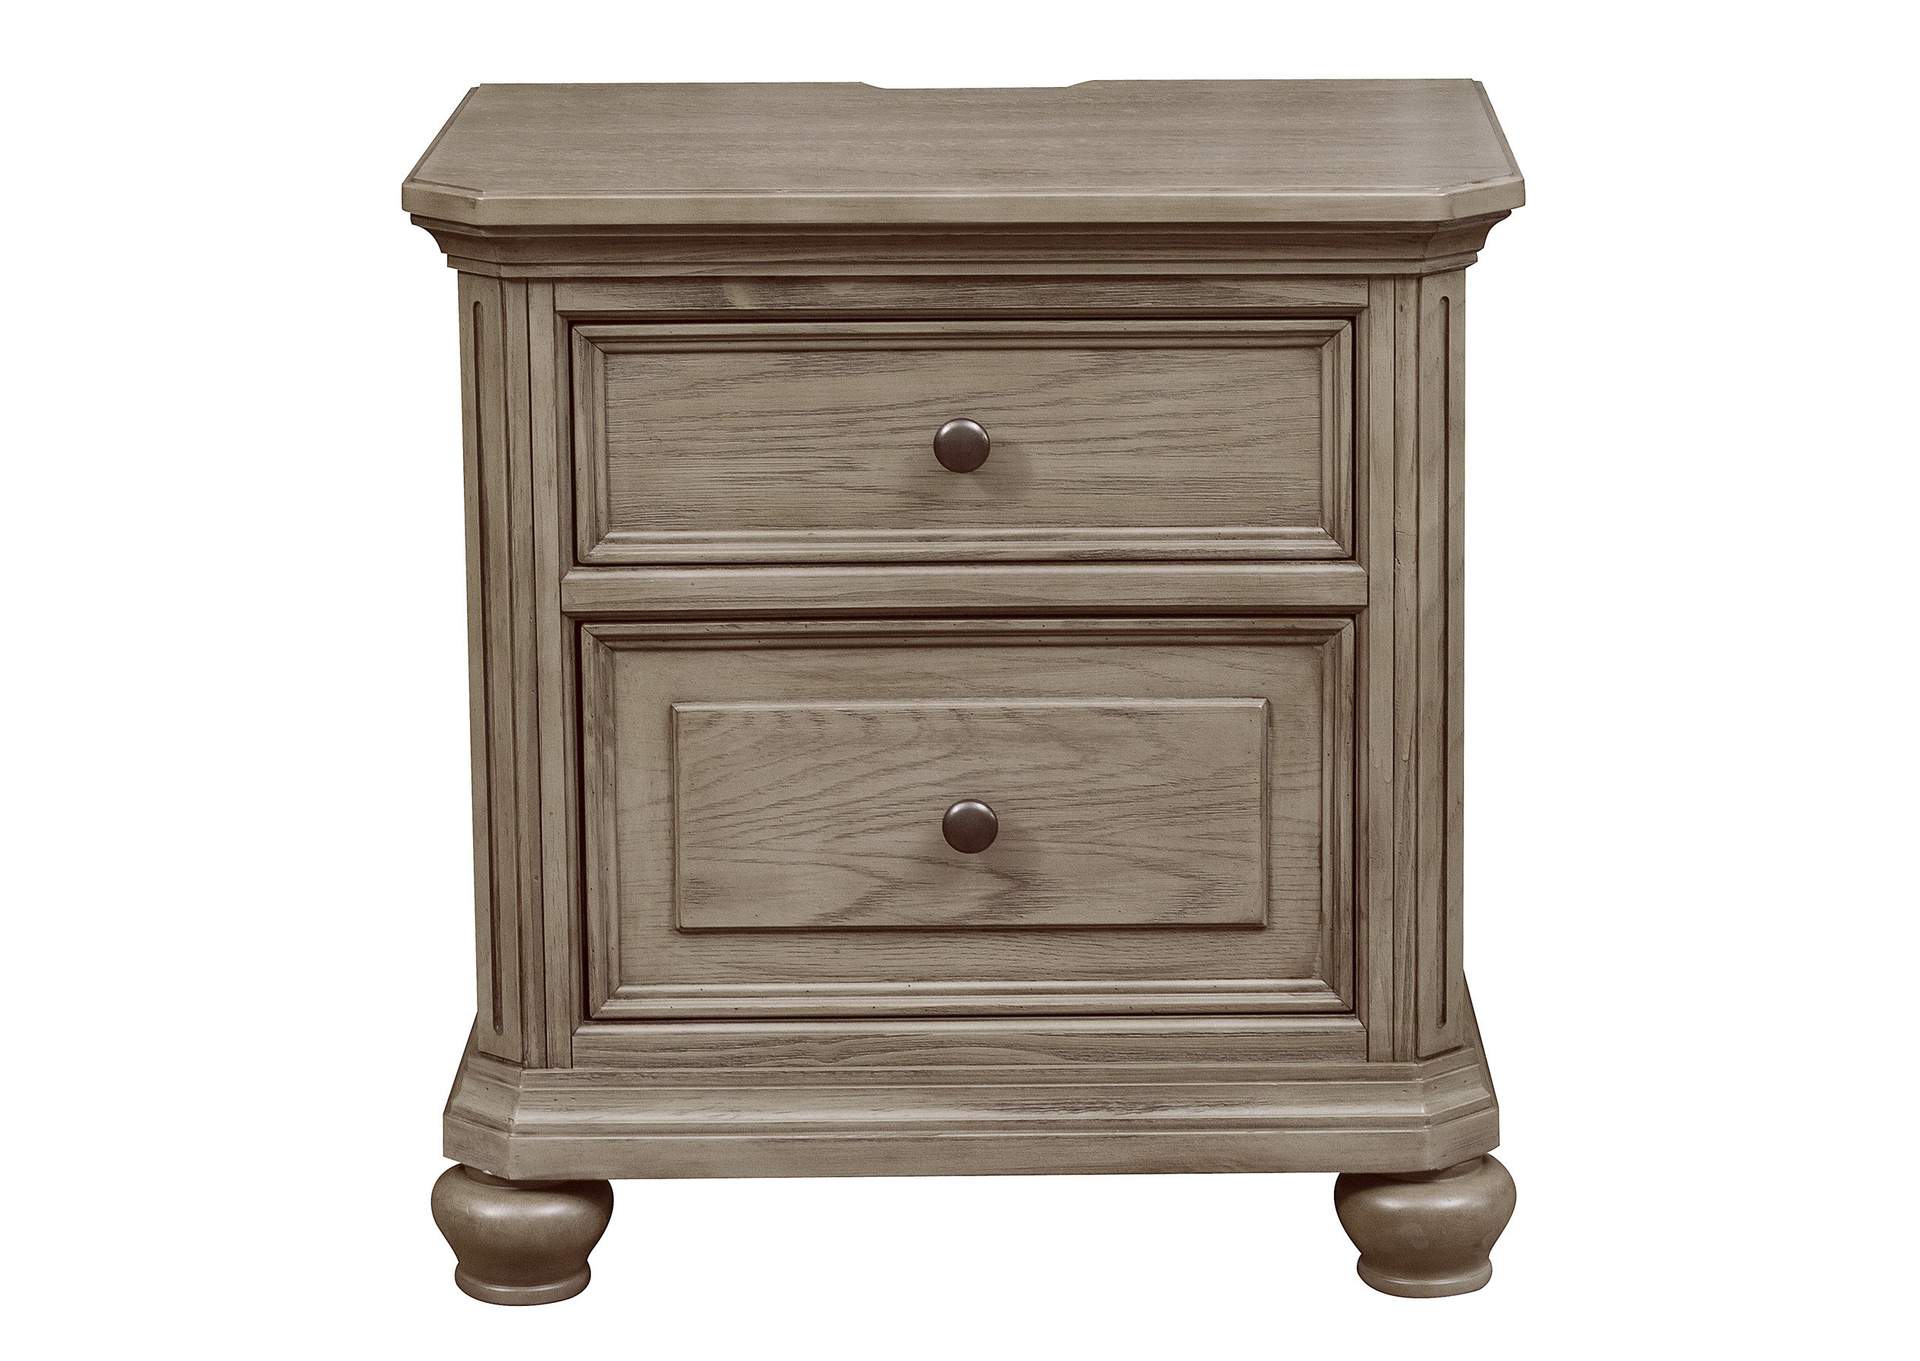 Lavonia Ash Night Stand,Homelegance